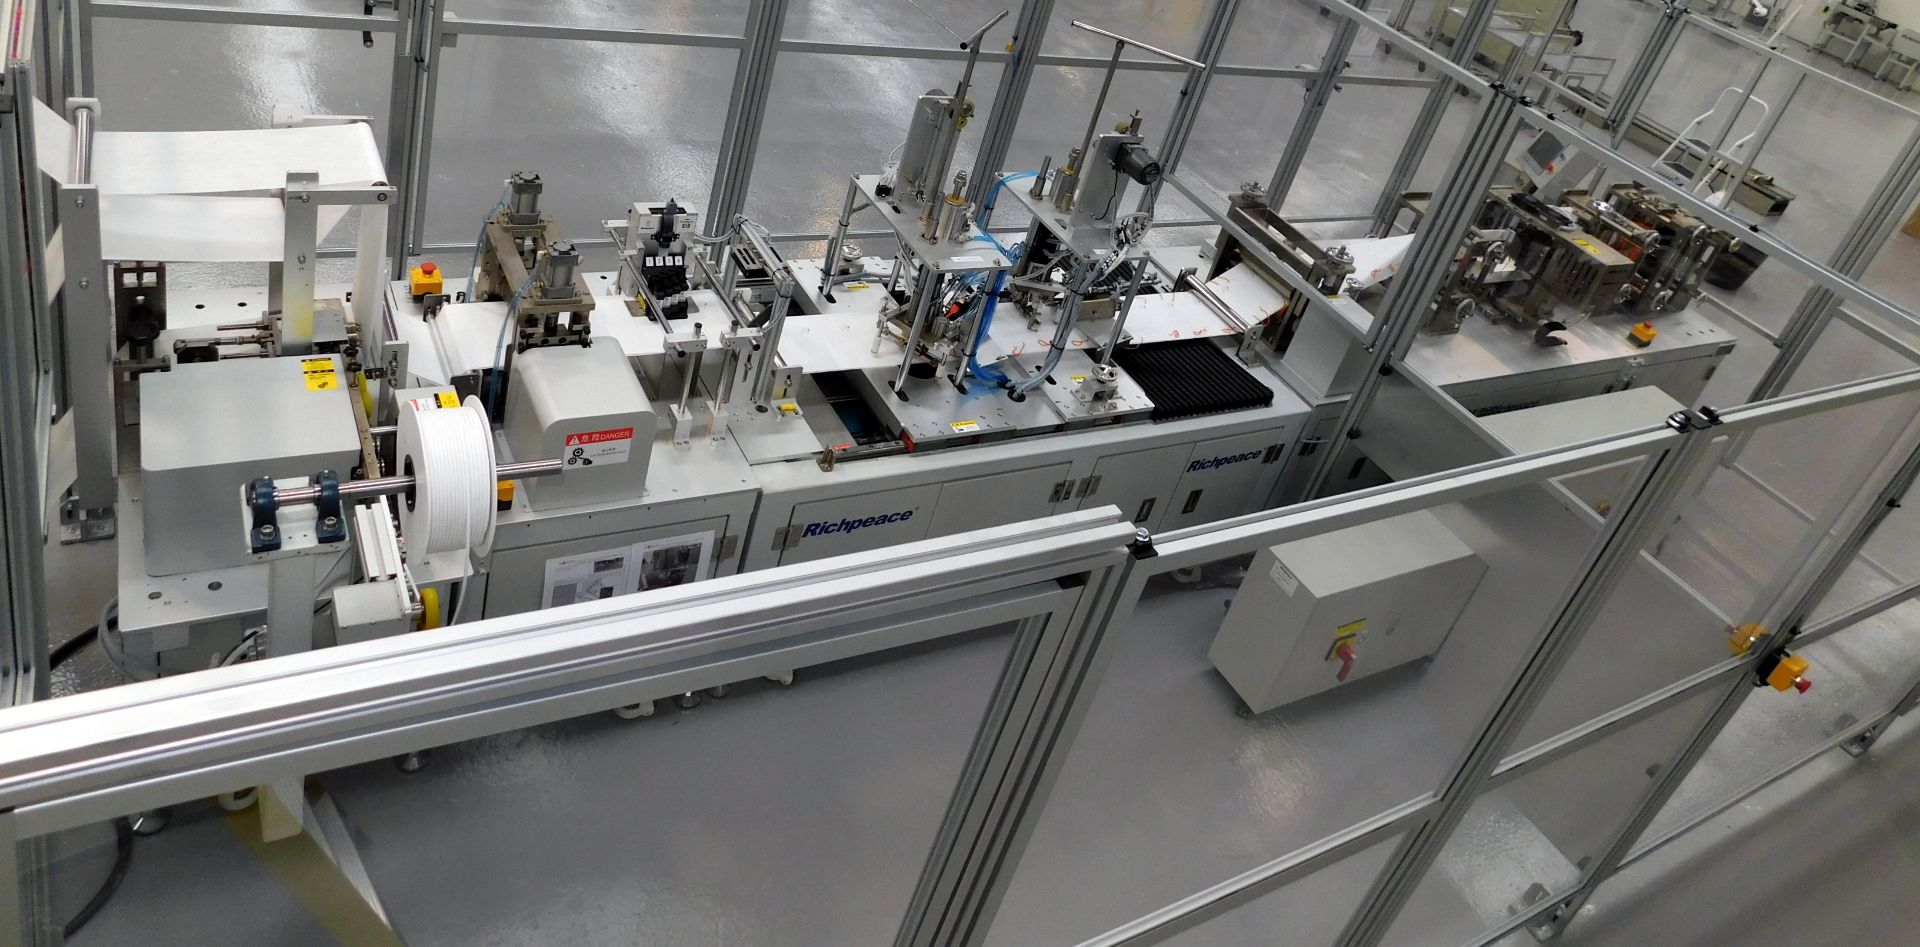 Tianjin Richpeace Ultrasonic Flat Fold Mask Production Line (Perspex Screening (Lot 11) not included - Image 4 of 56